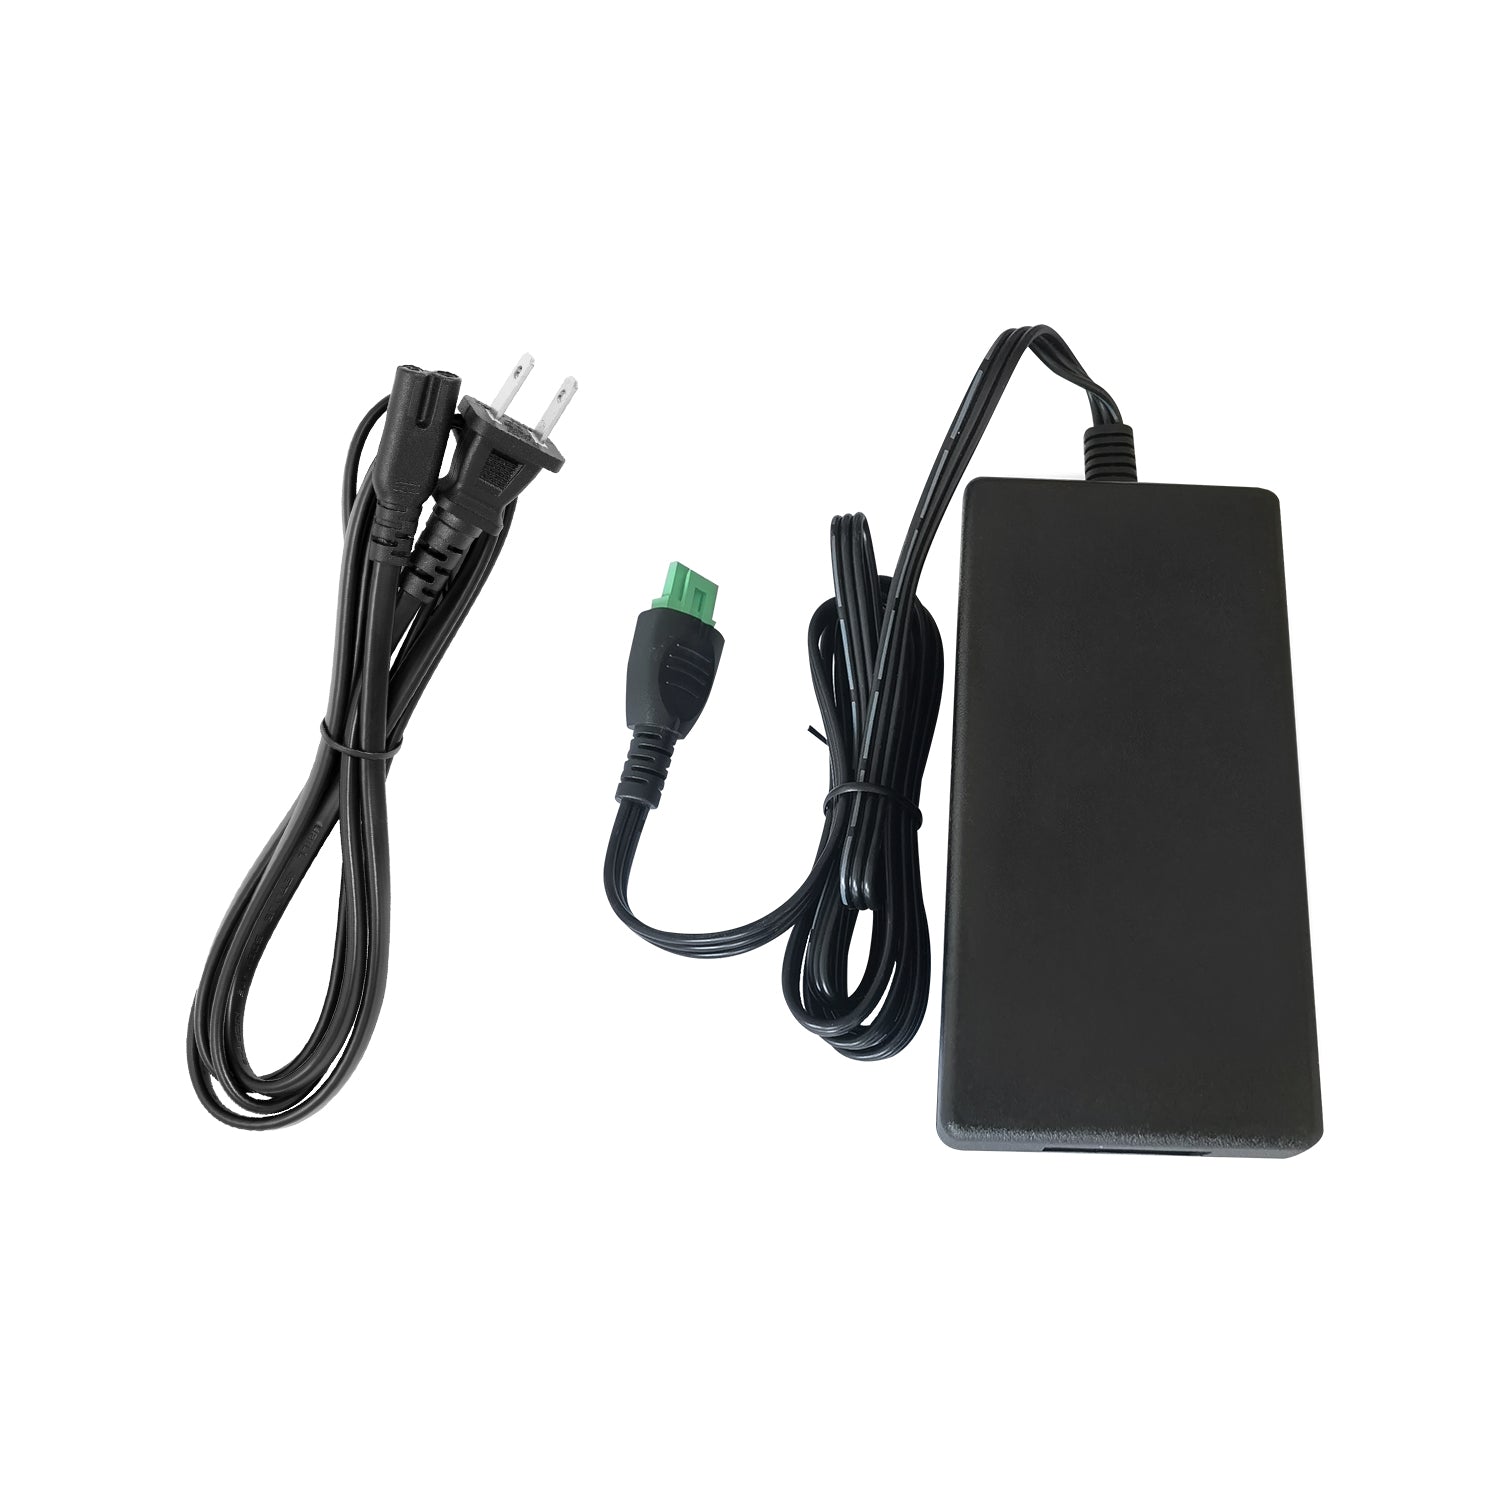 AC Adapter for HP 0957-2305 Printer